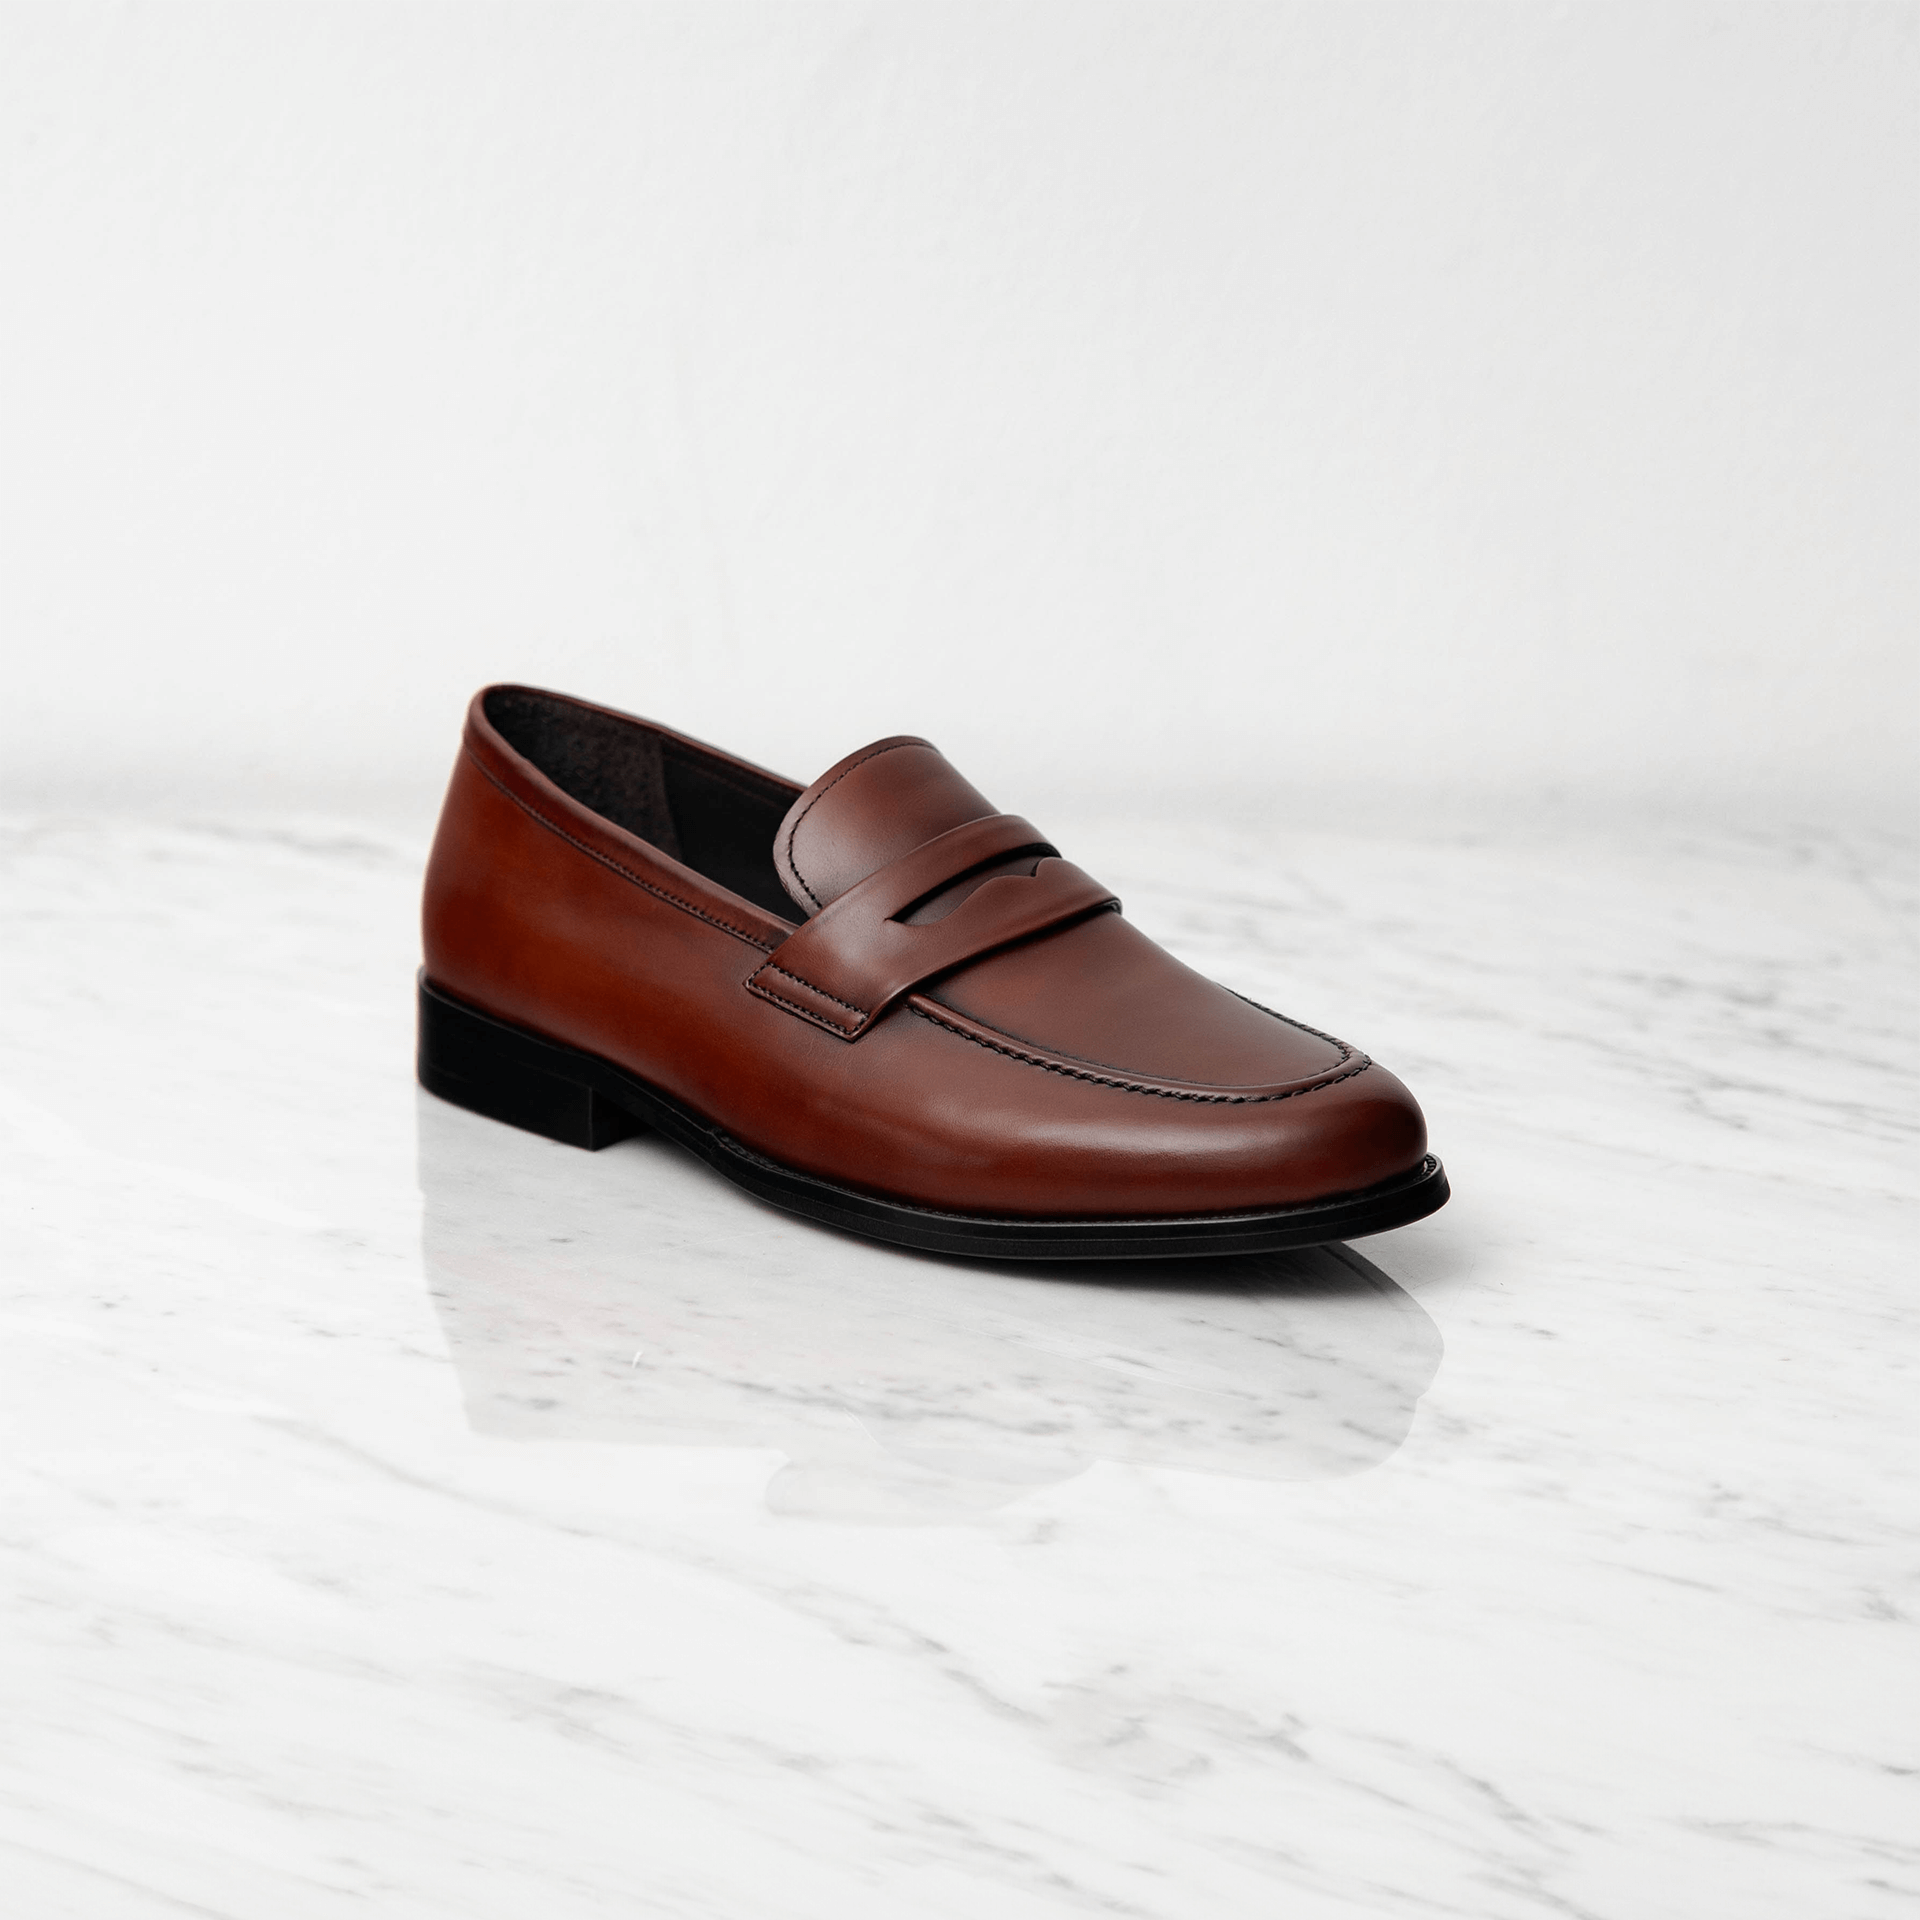 Classic Penny Loafer, Duxton, Mid Tan